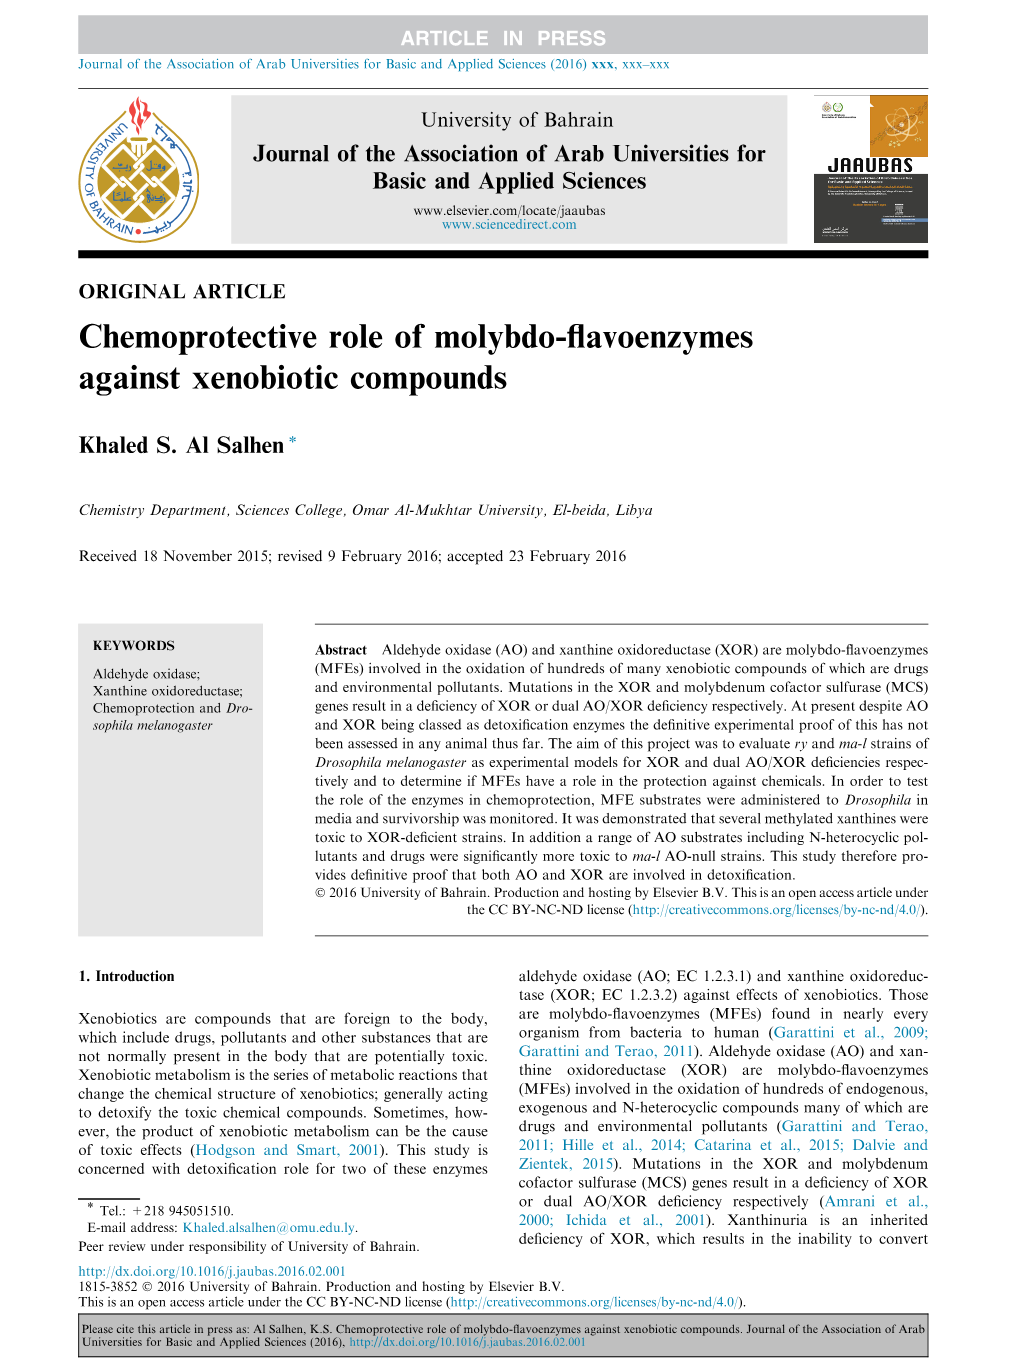 Chemoprotective Role of Molybdo-Flavoenzymes Against